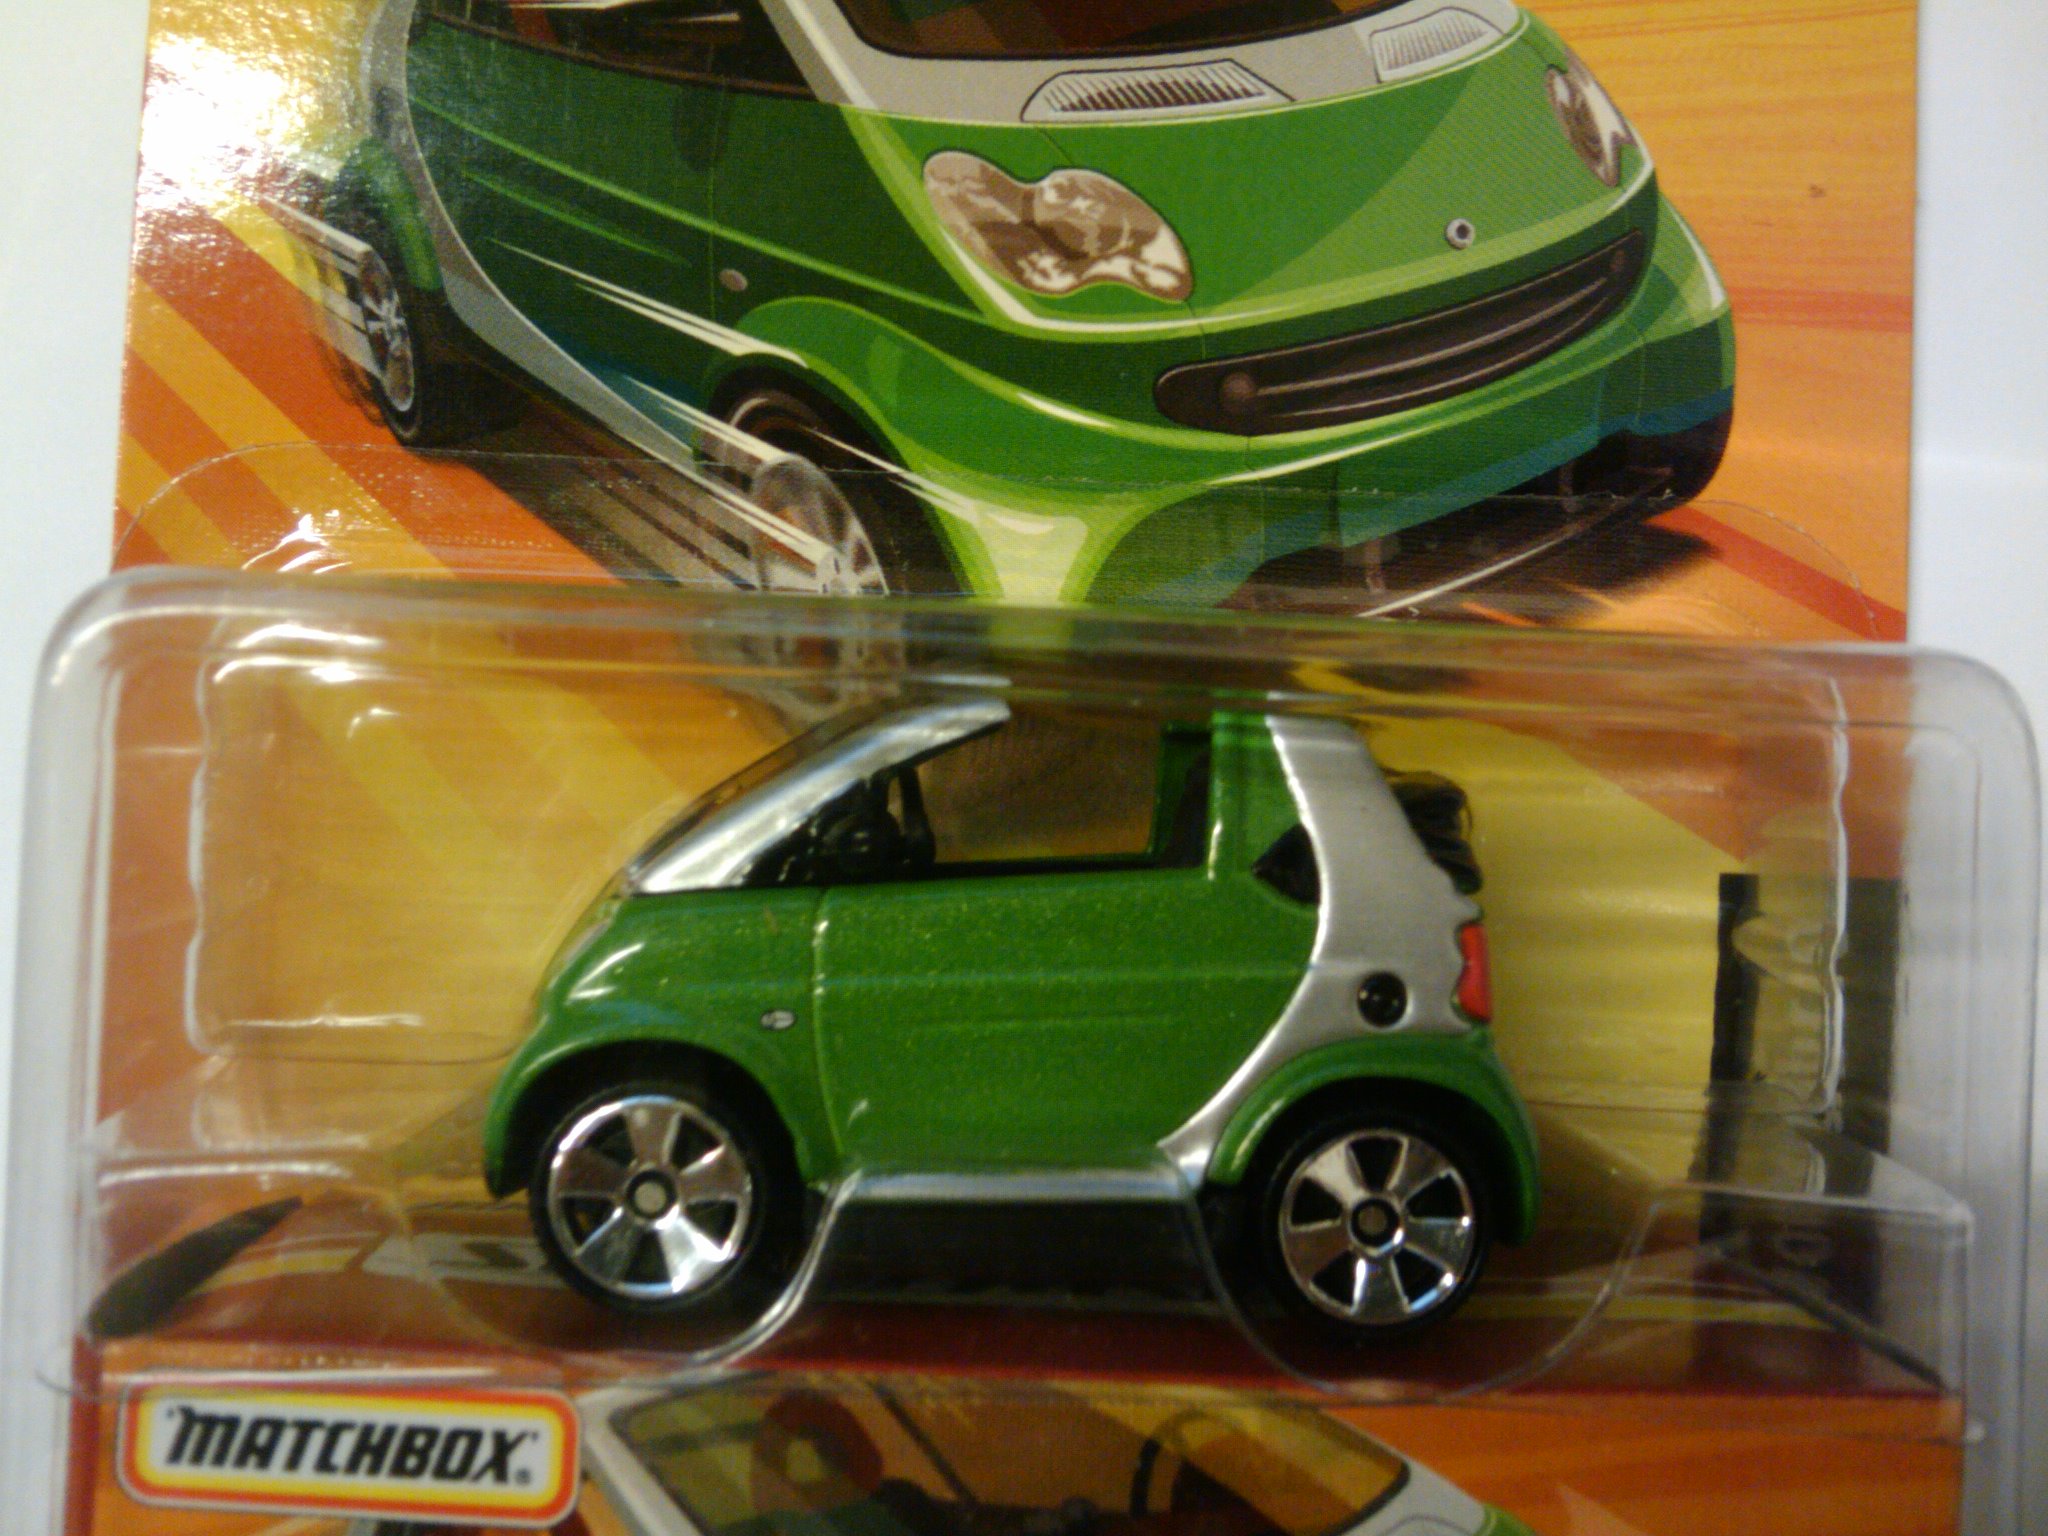 Smart Fortwo Coupe - Matchbox Cars Wiki